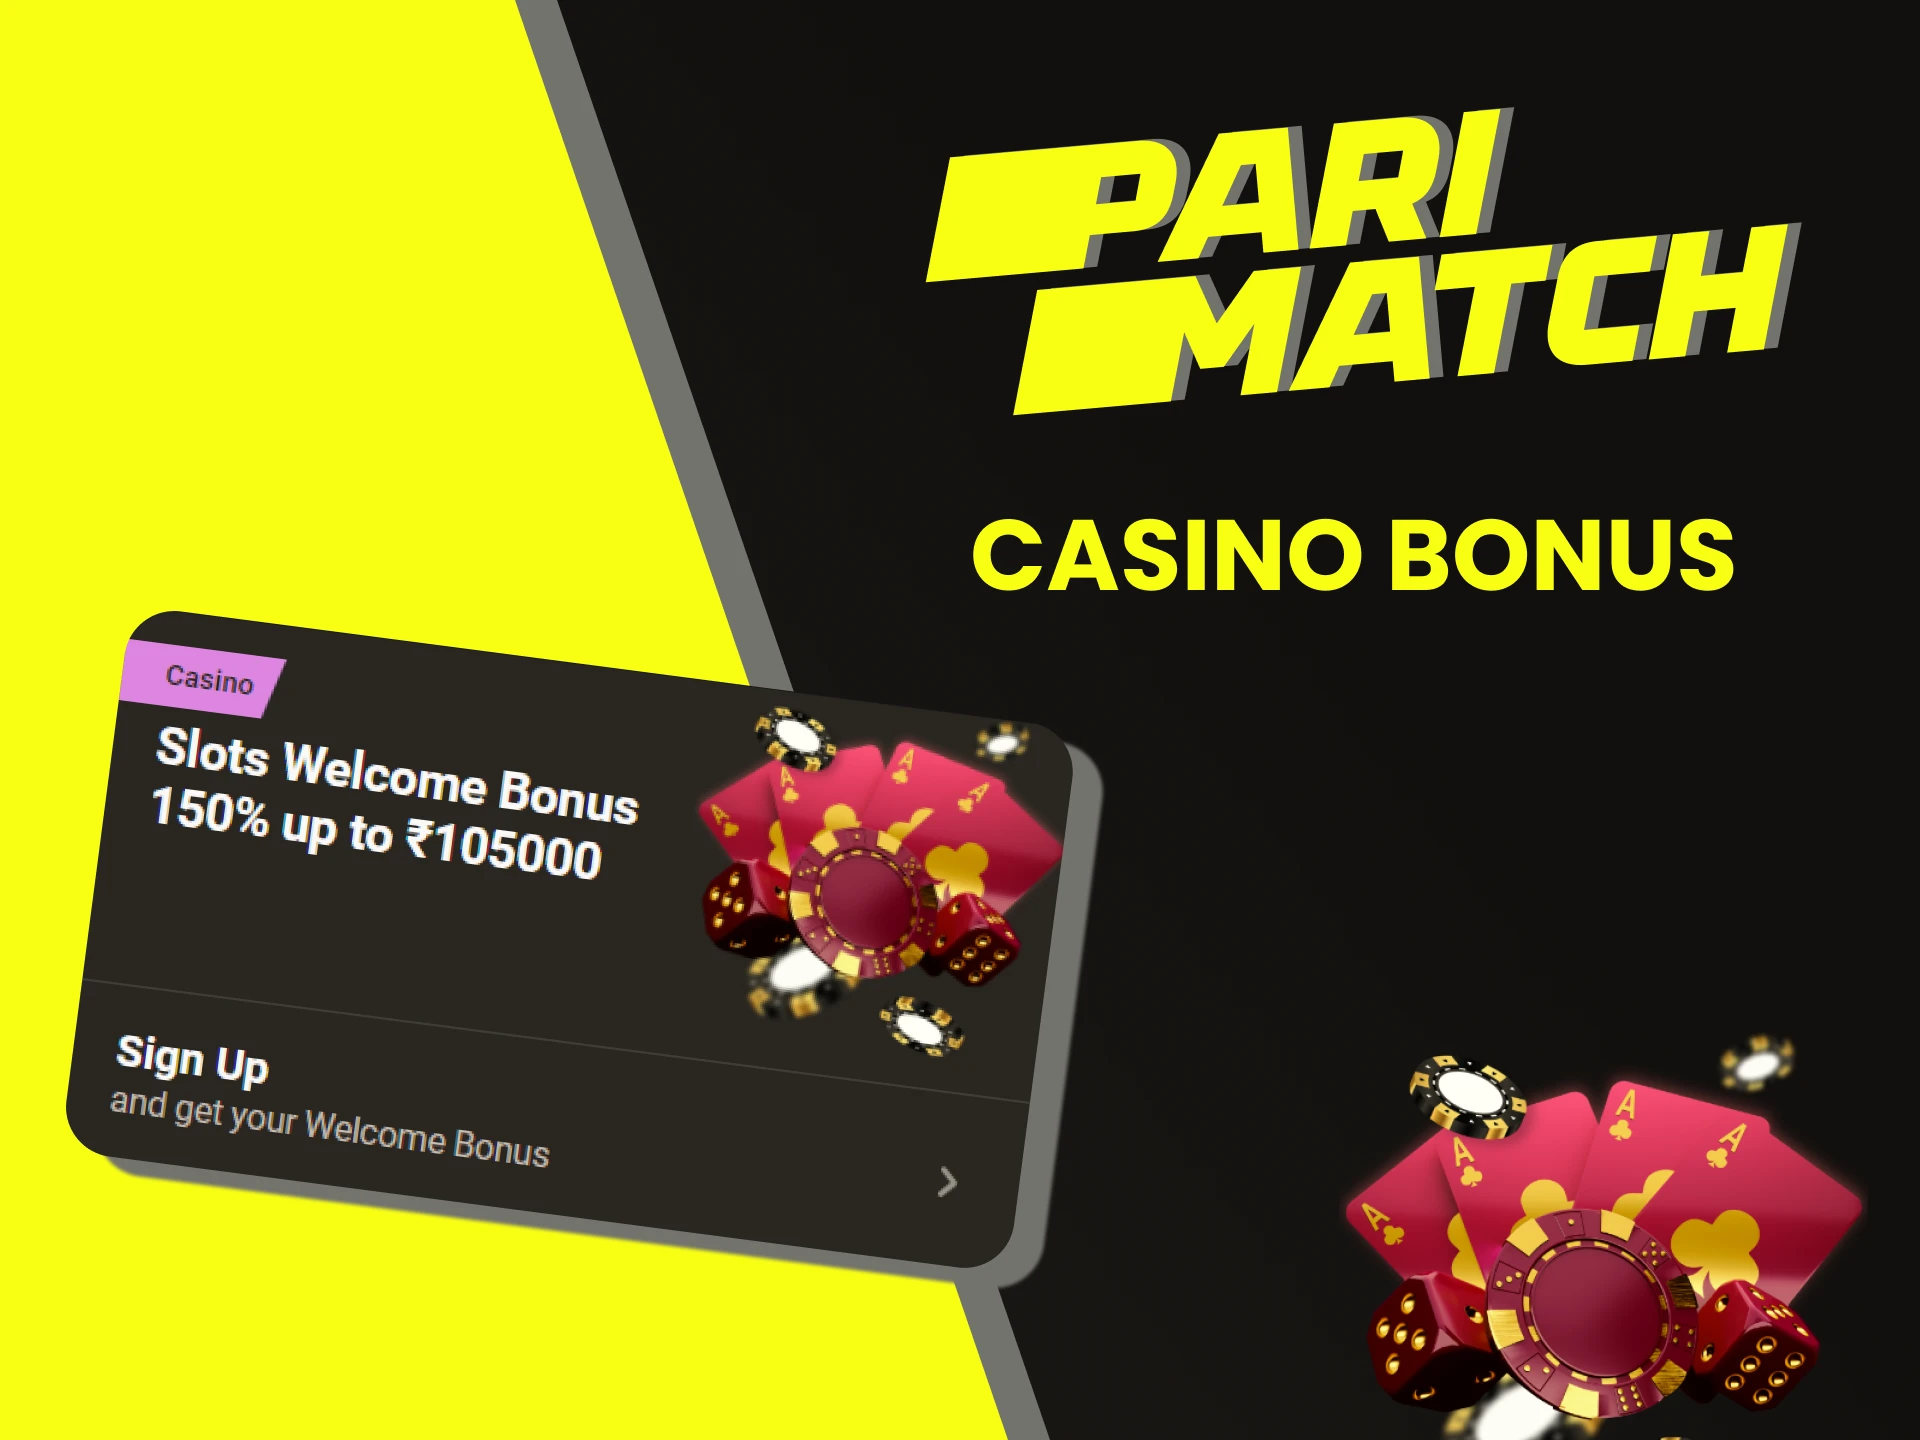 Parimatch gives a welcome bonus to the casino.